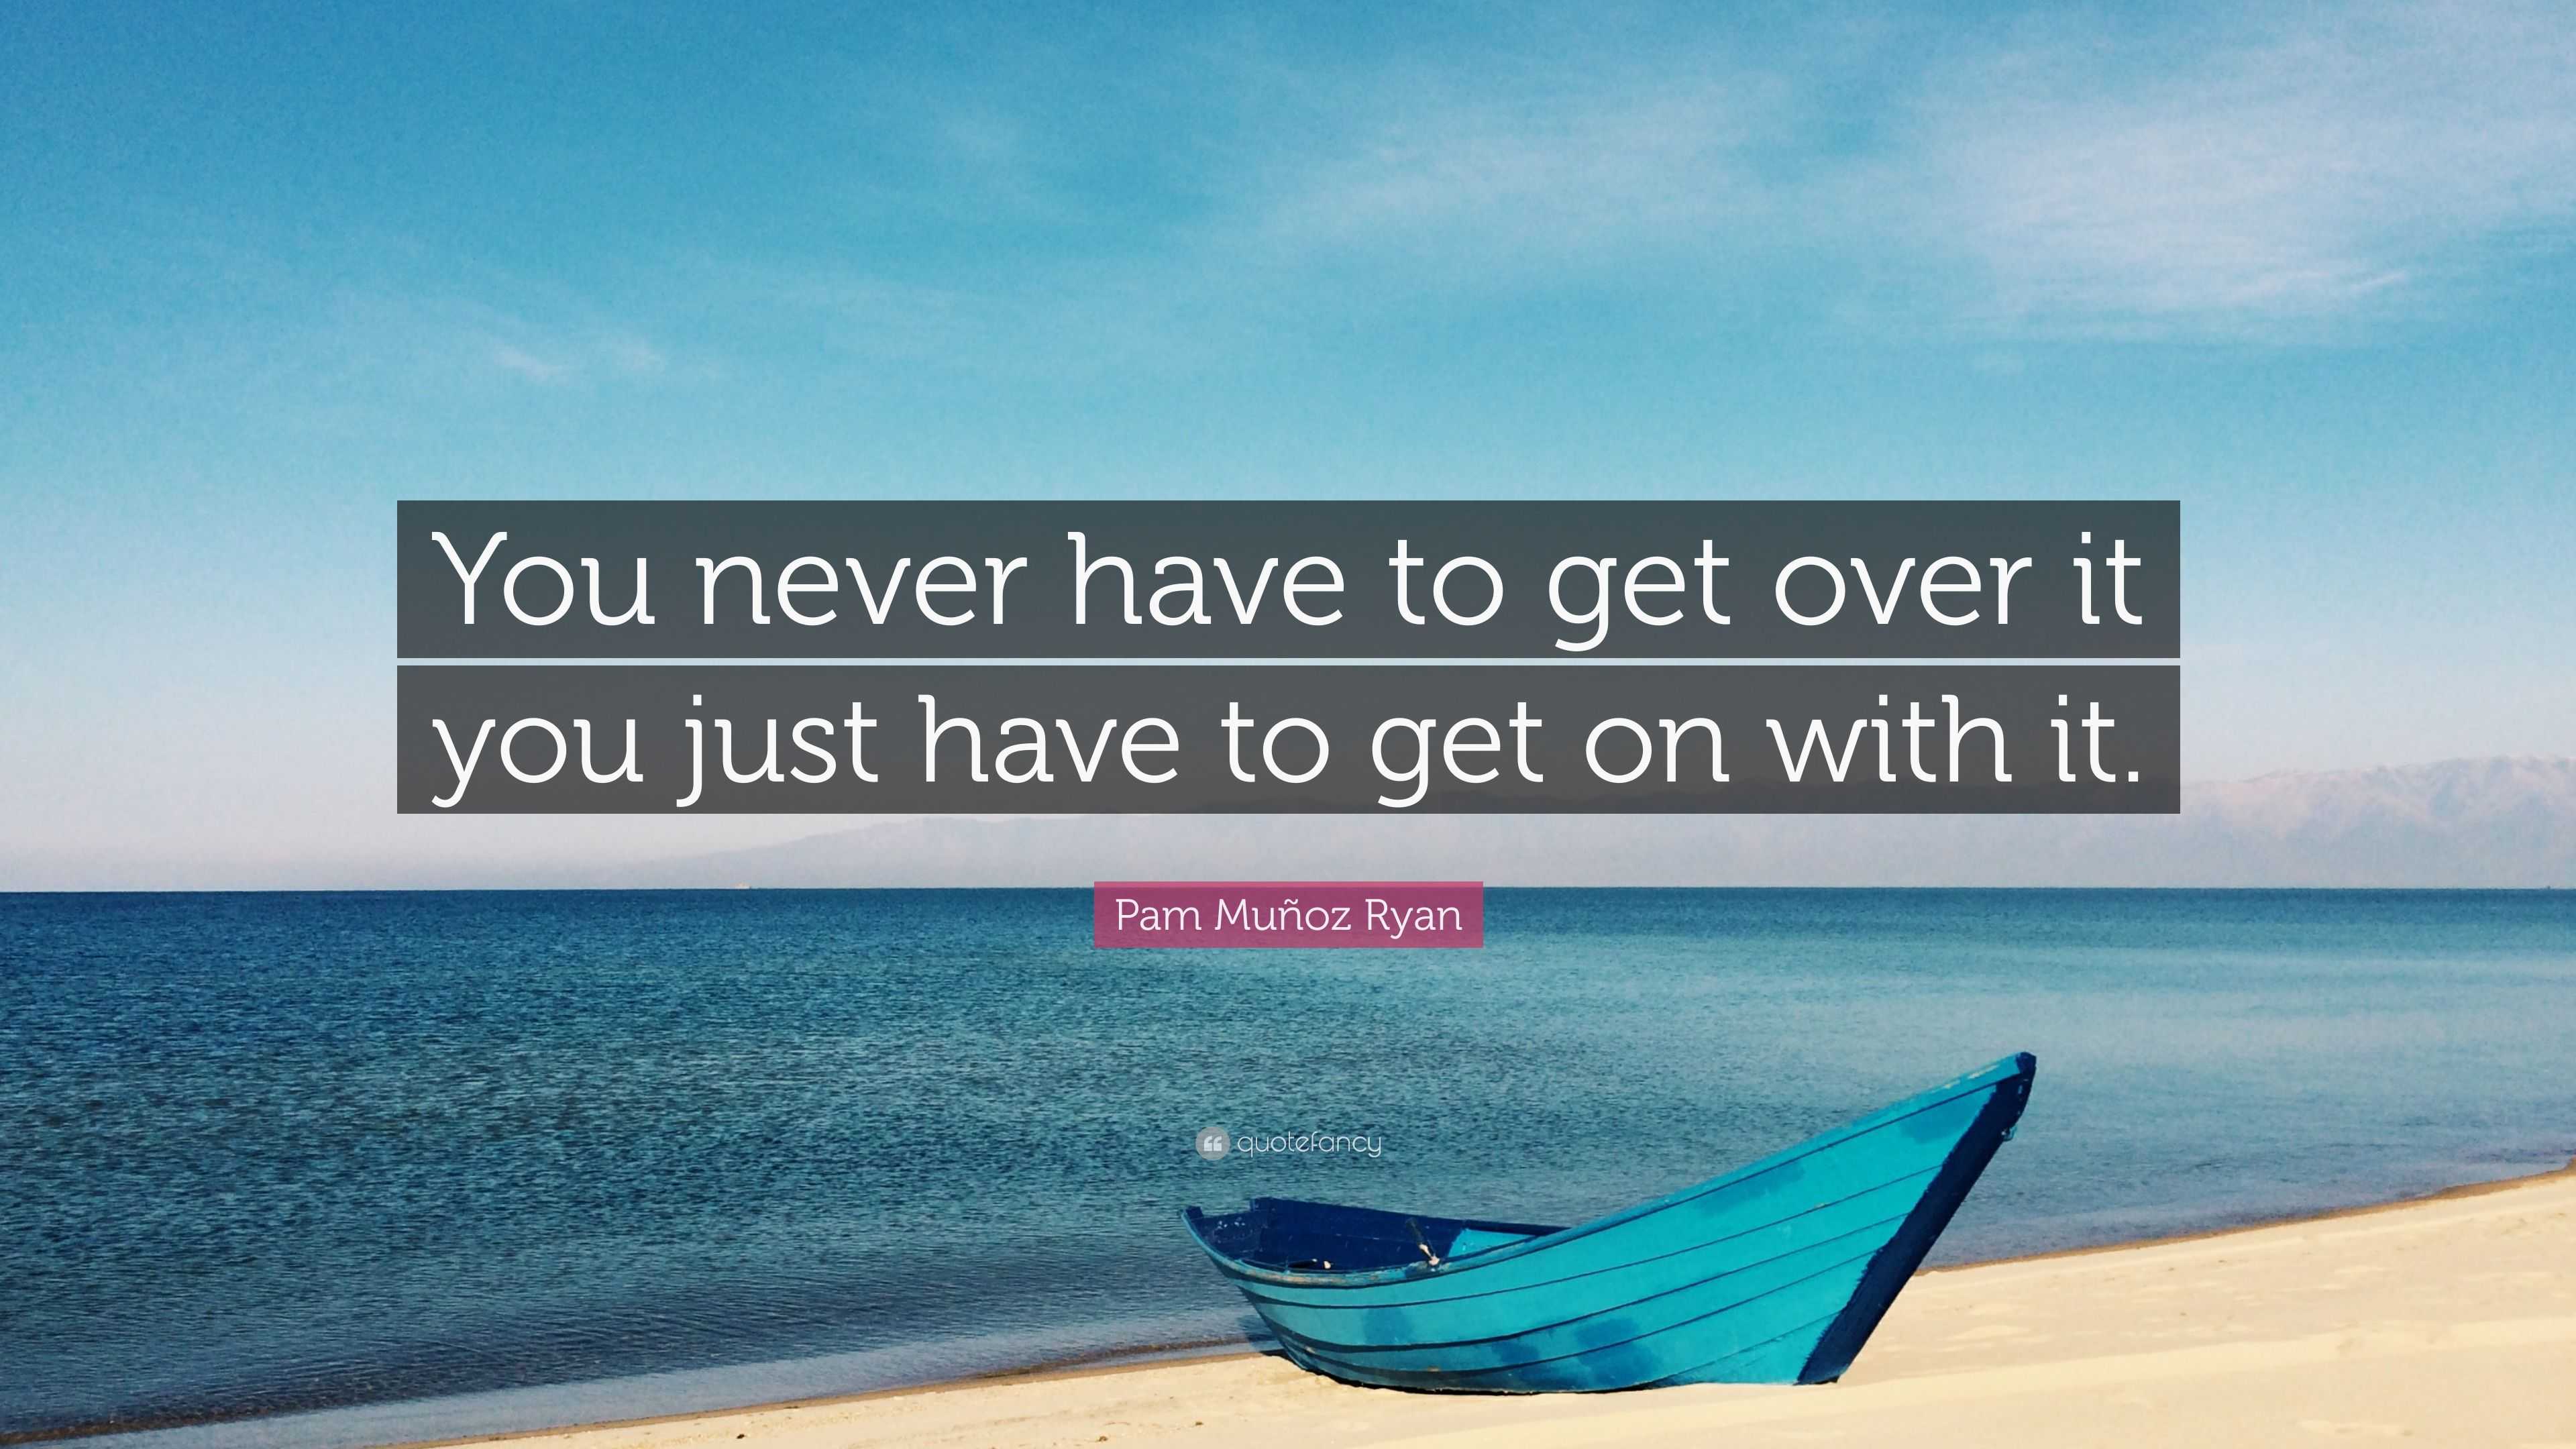 Pam Muñoz Ryan Quote: “You never have to get over it you just have to get